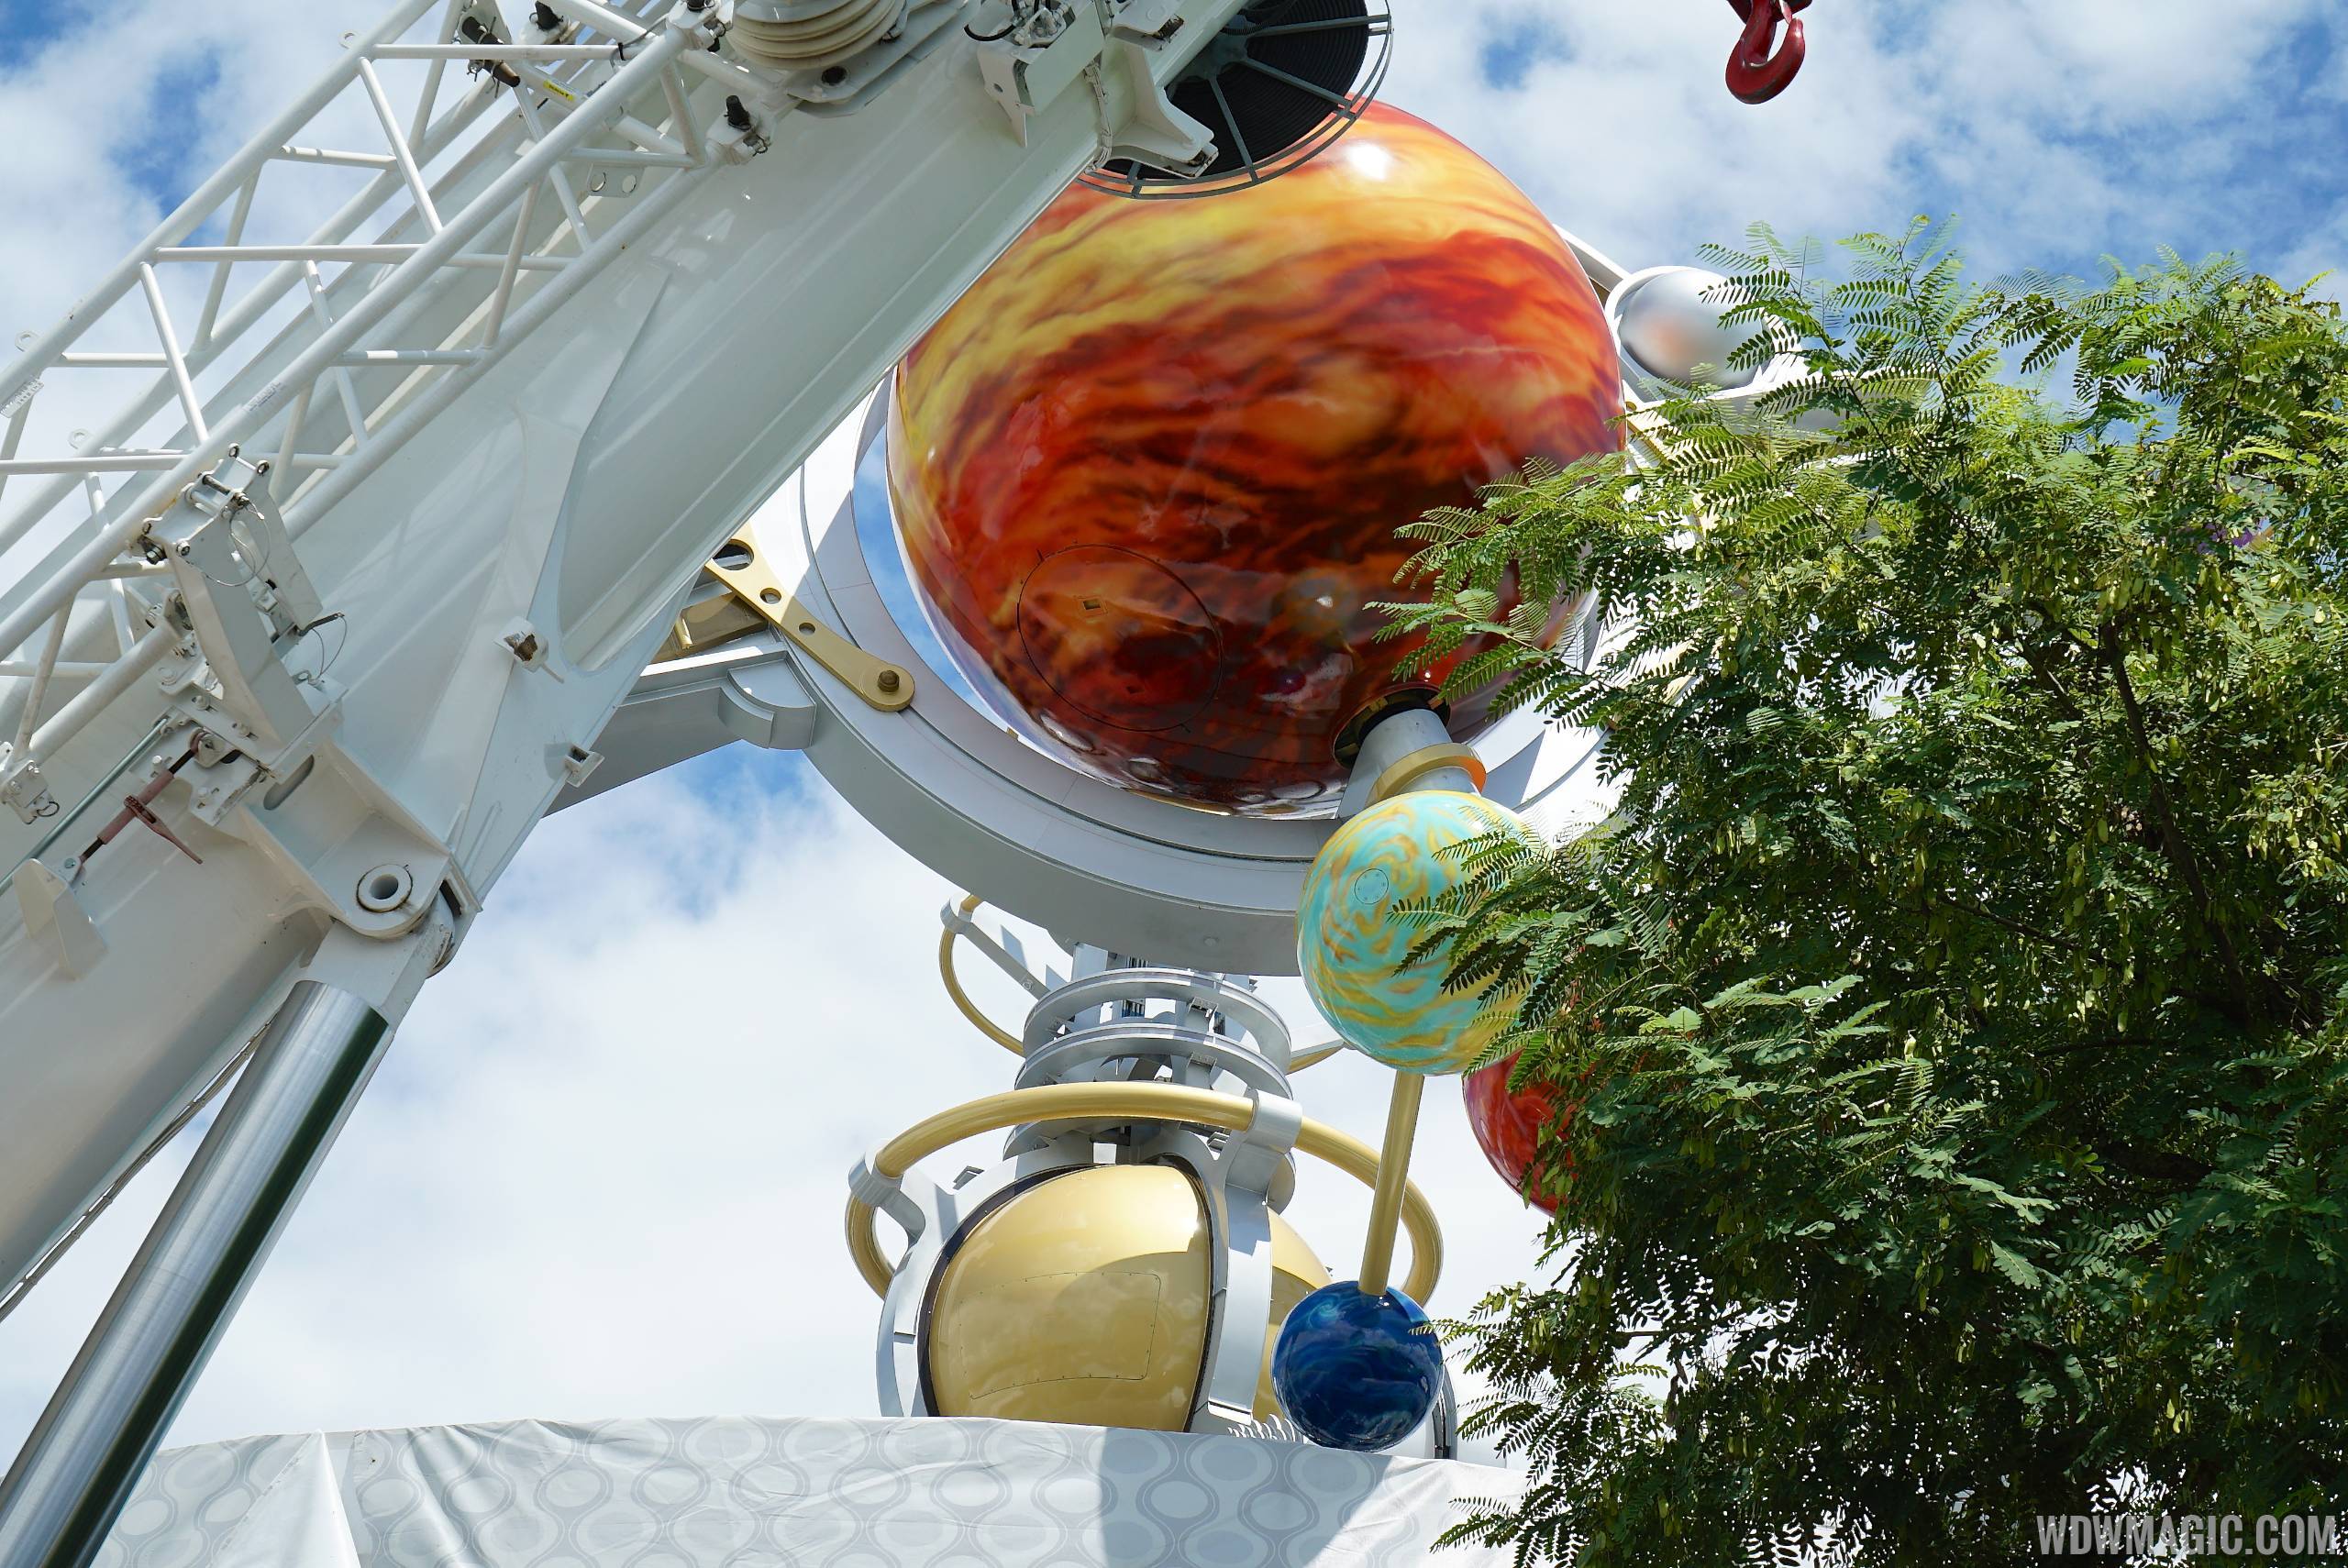 PHOTOS - Planets return to the Astro Orbitor as refurbishment continues